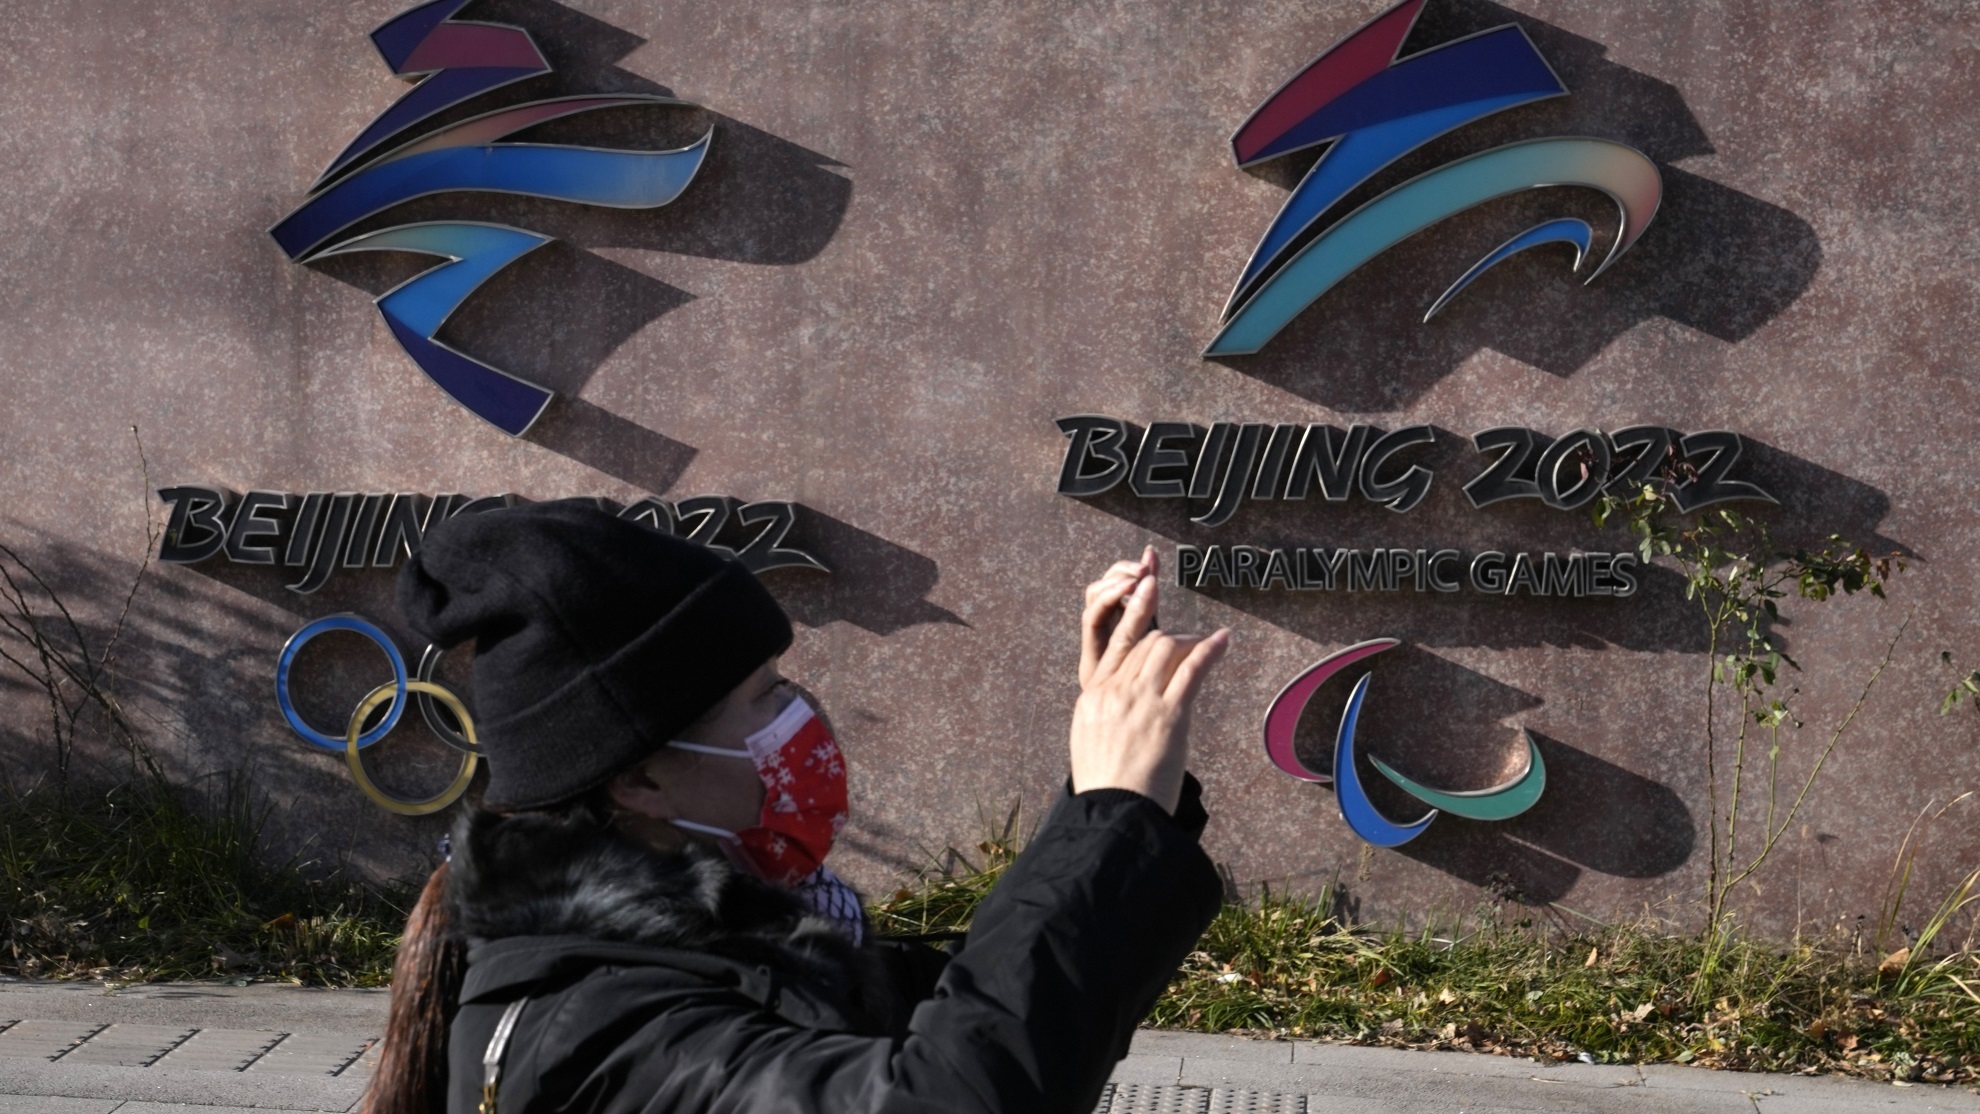 A woman wearing takes photos near the logos for the Beijing Winter Olympics and Paralympics in Beijing.